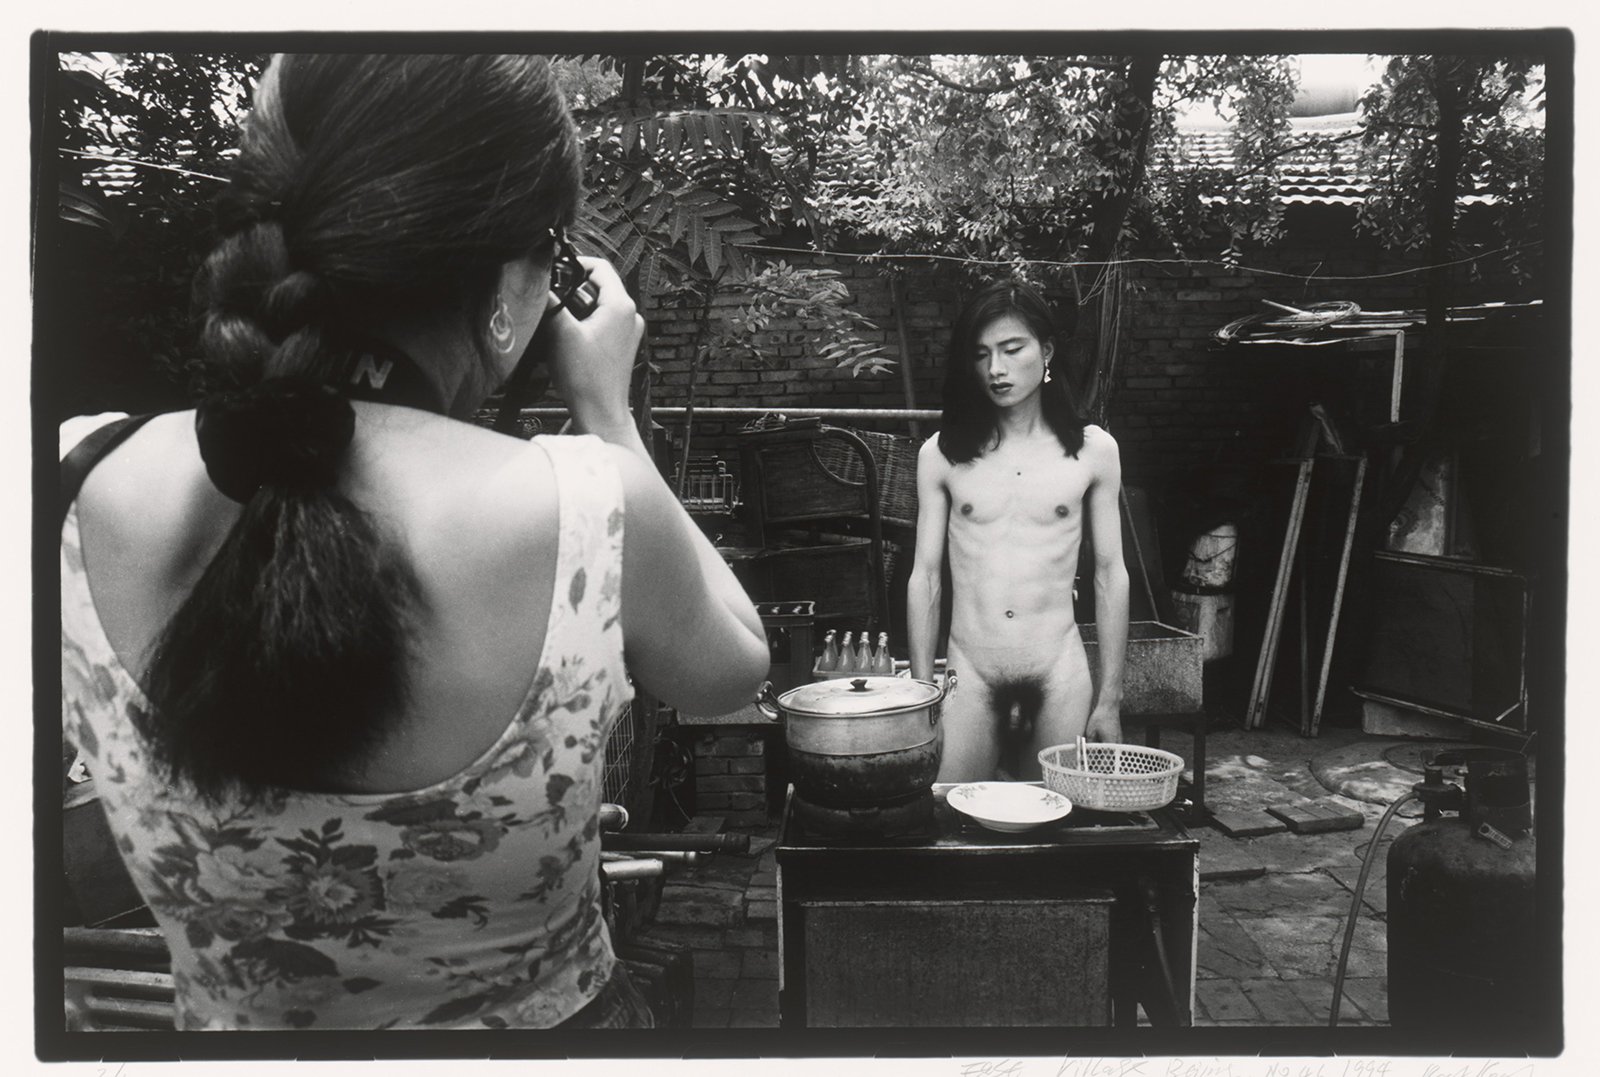 A black and white photograph showing a woman taking a photo of a naked man with long hair